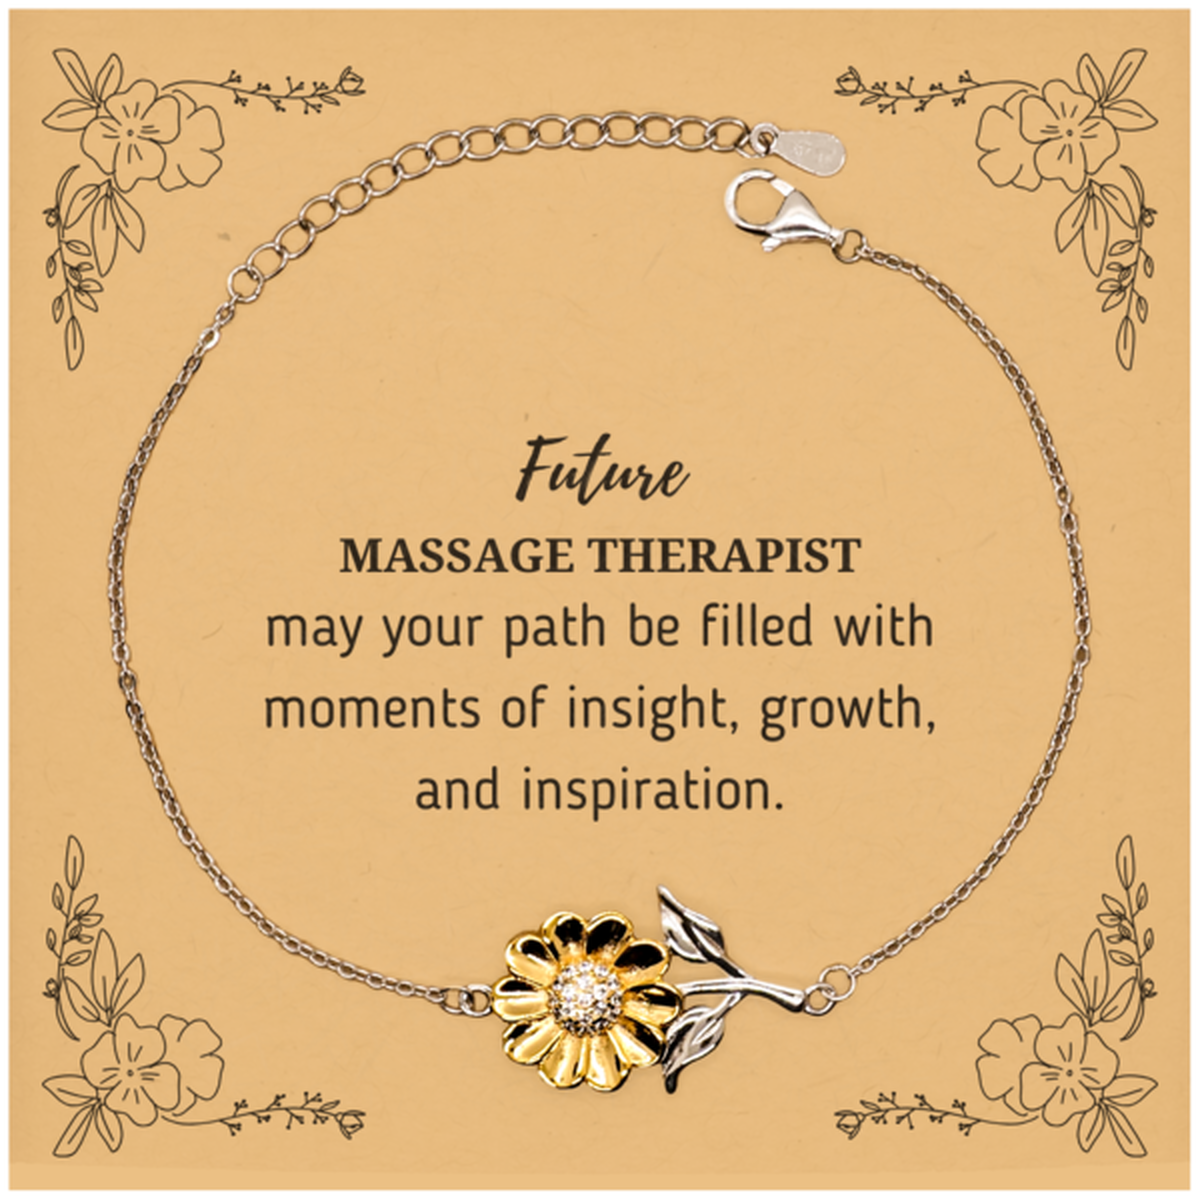 Future Massage Therapist Gifts, May your path be filled with moments of insight, Graduation Gifts for New Massage Therapist, Christmas Unique Sunflower Bracelet For Men, Women, Friends